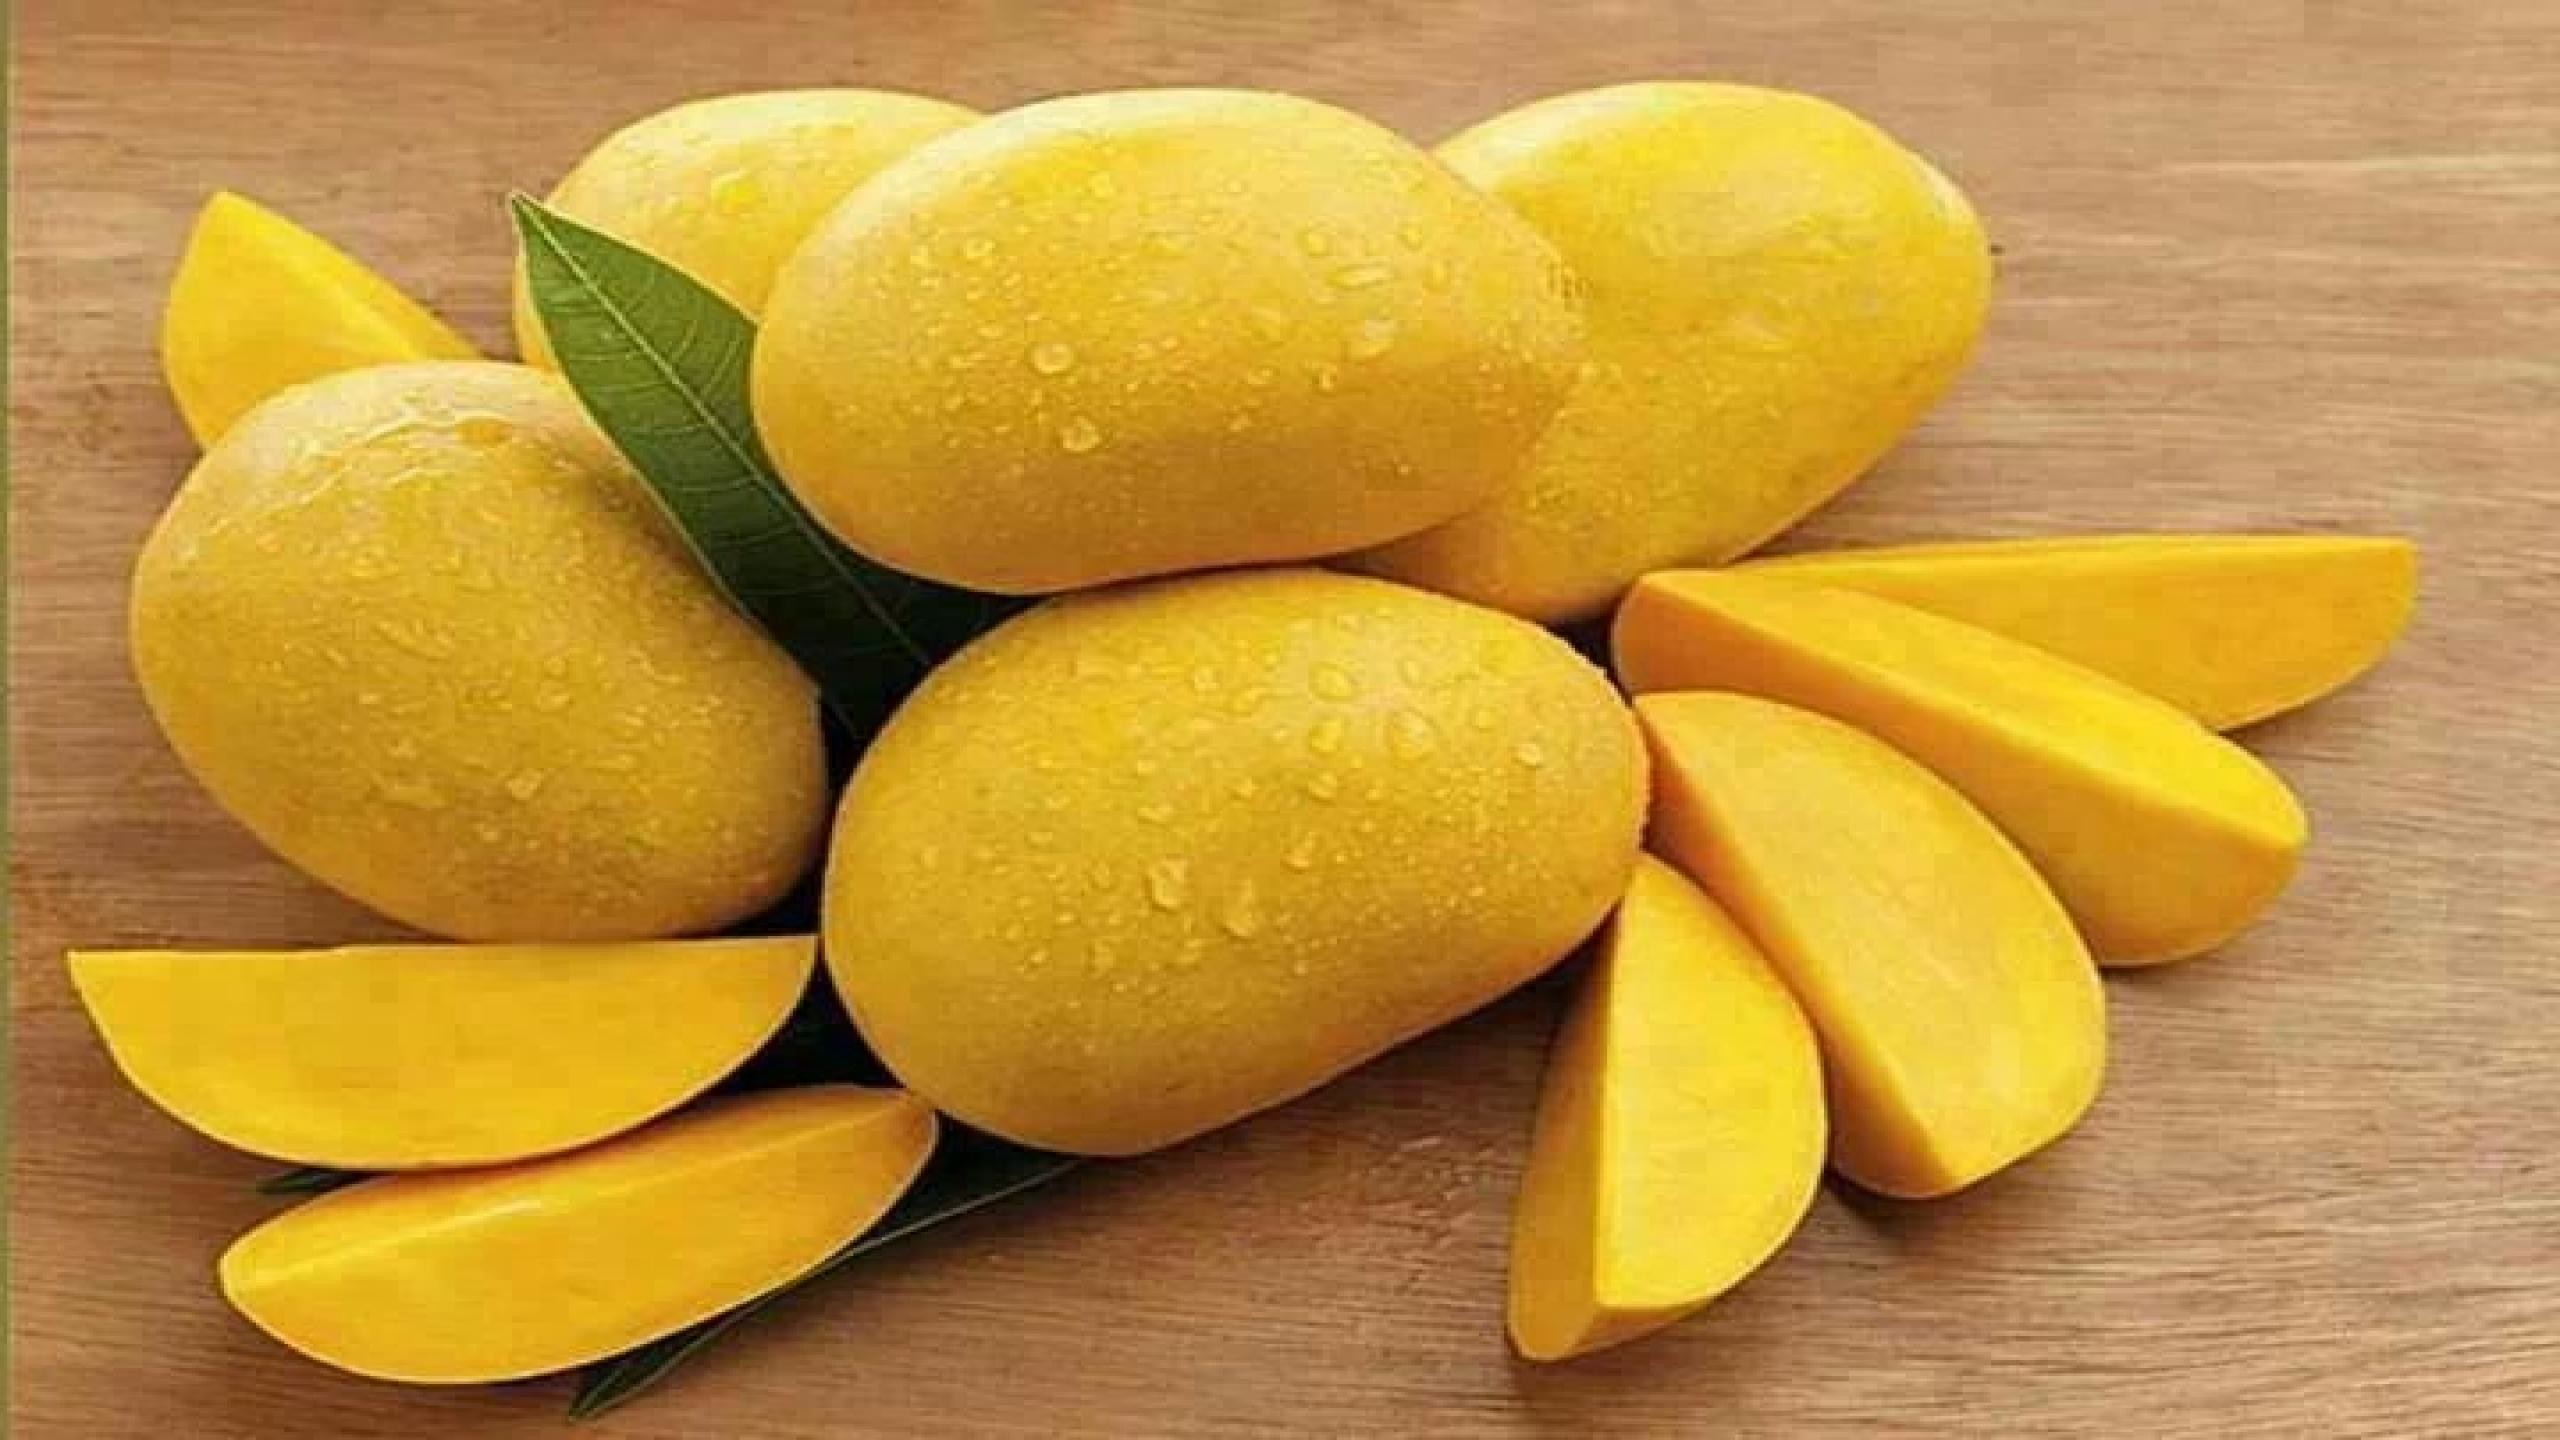 2560x1440 1600x1200 Sweet Fruit Mango Wallpaper HD Pictures \u2013 One HD Wallpaper  Pictures .